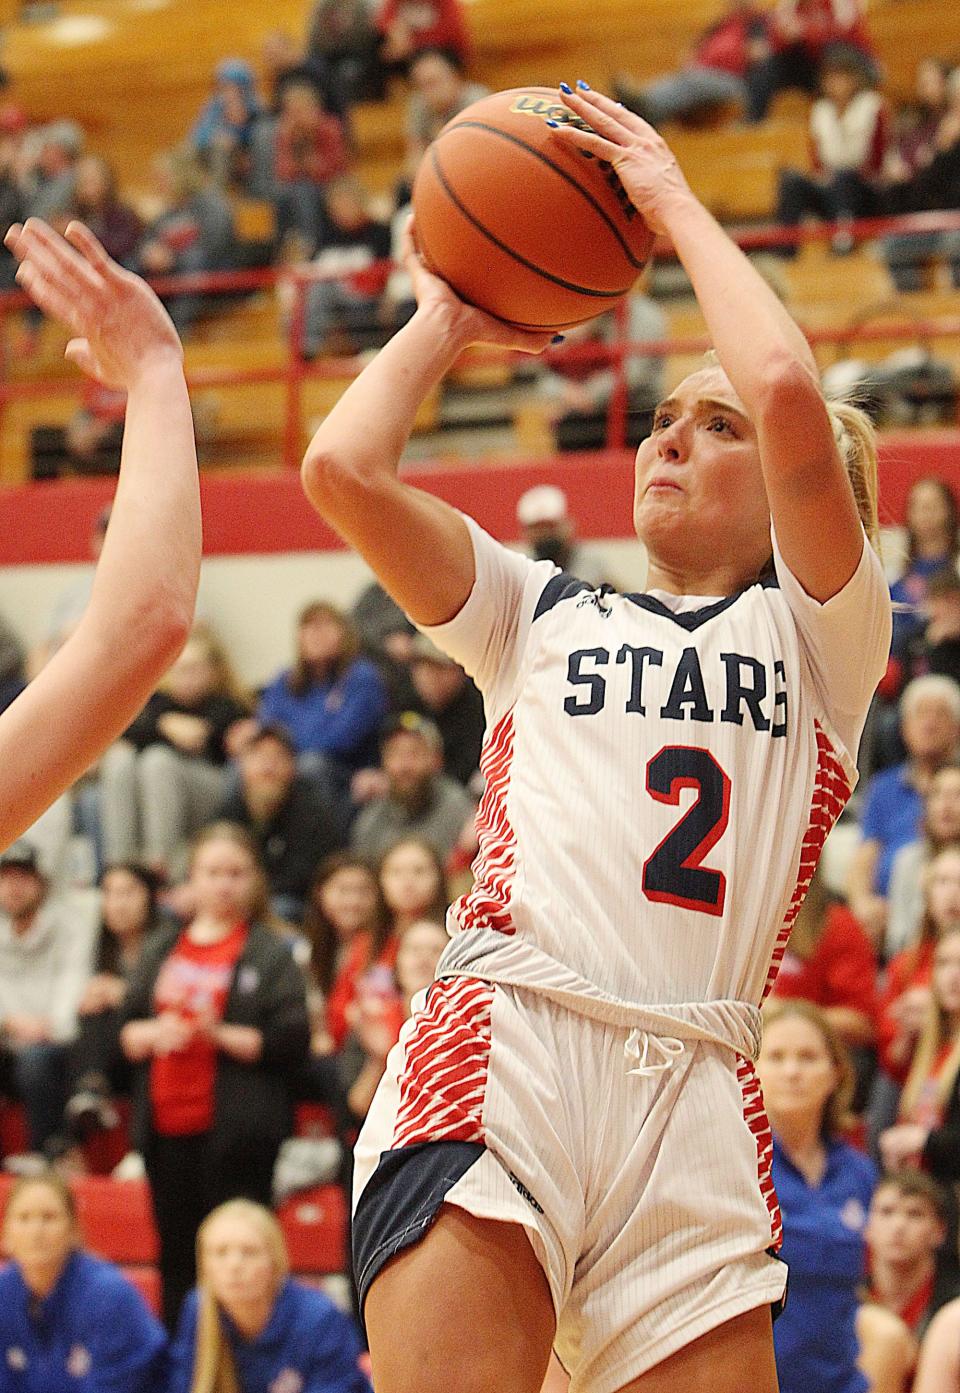 Bedford North Lawrence's Chloe Spreen (2) shoots from the baseline during the sectional final game on Tuesday, Feb. 8, 2022.